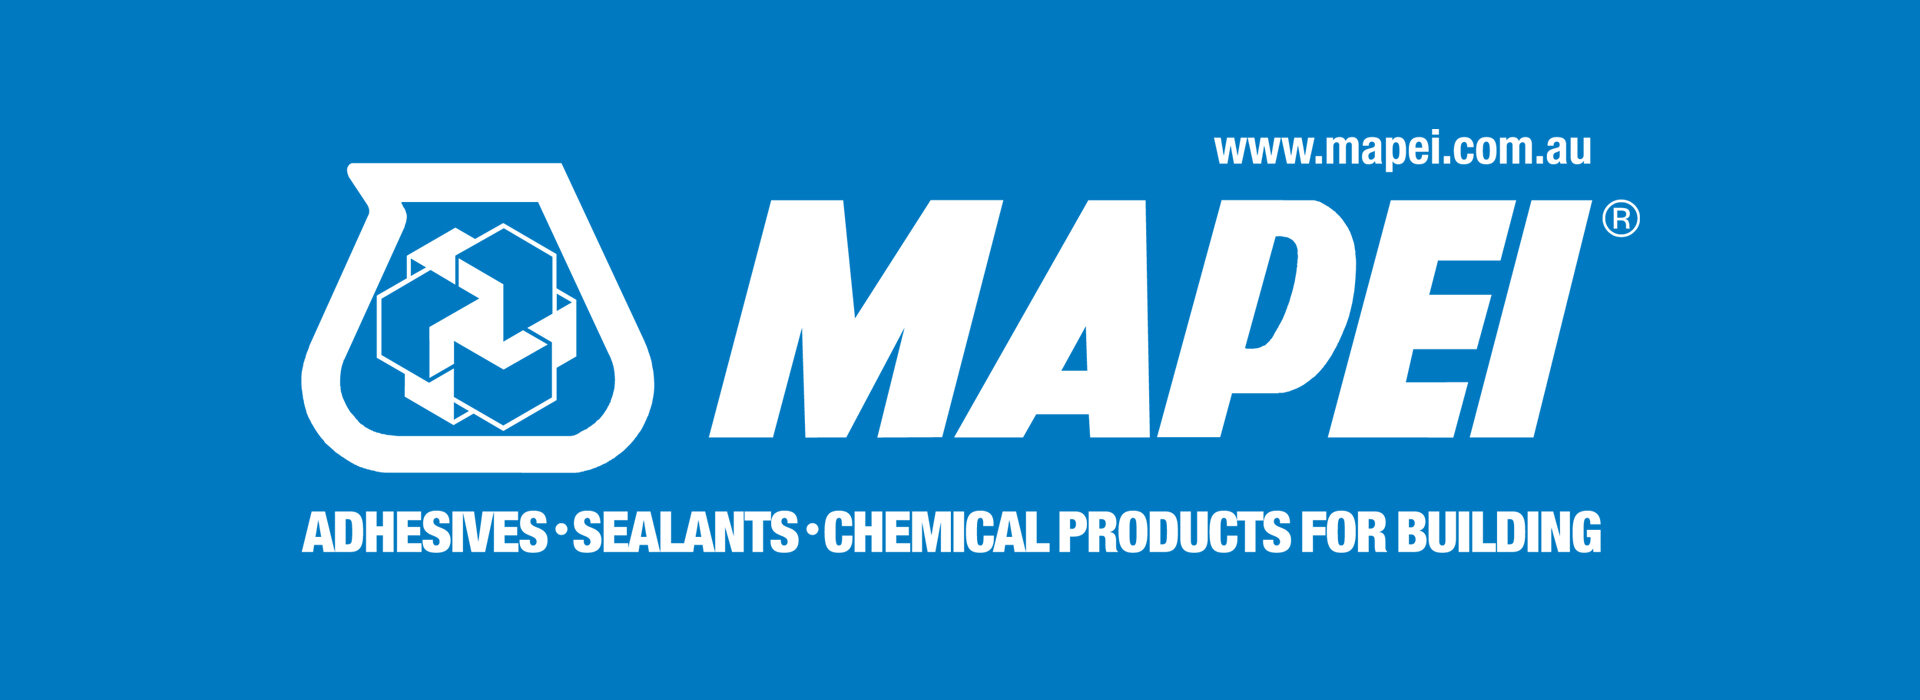 mapei-banner-col-smith-suppliers.jpg